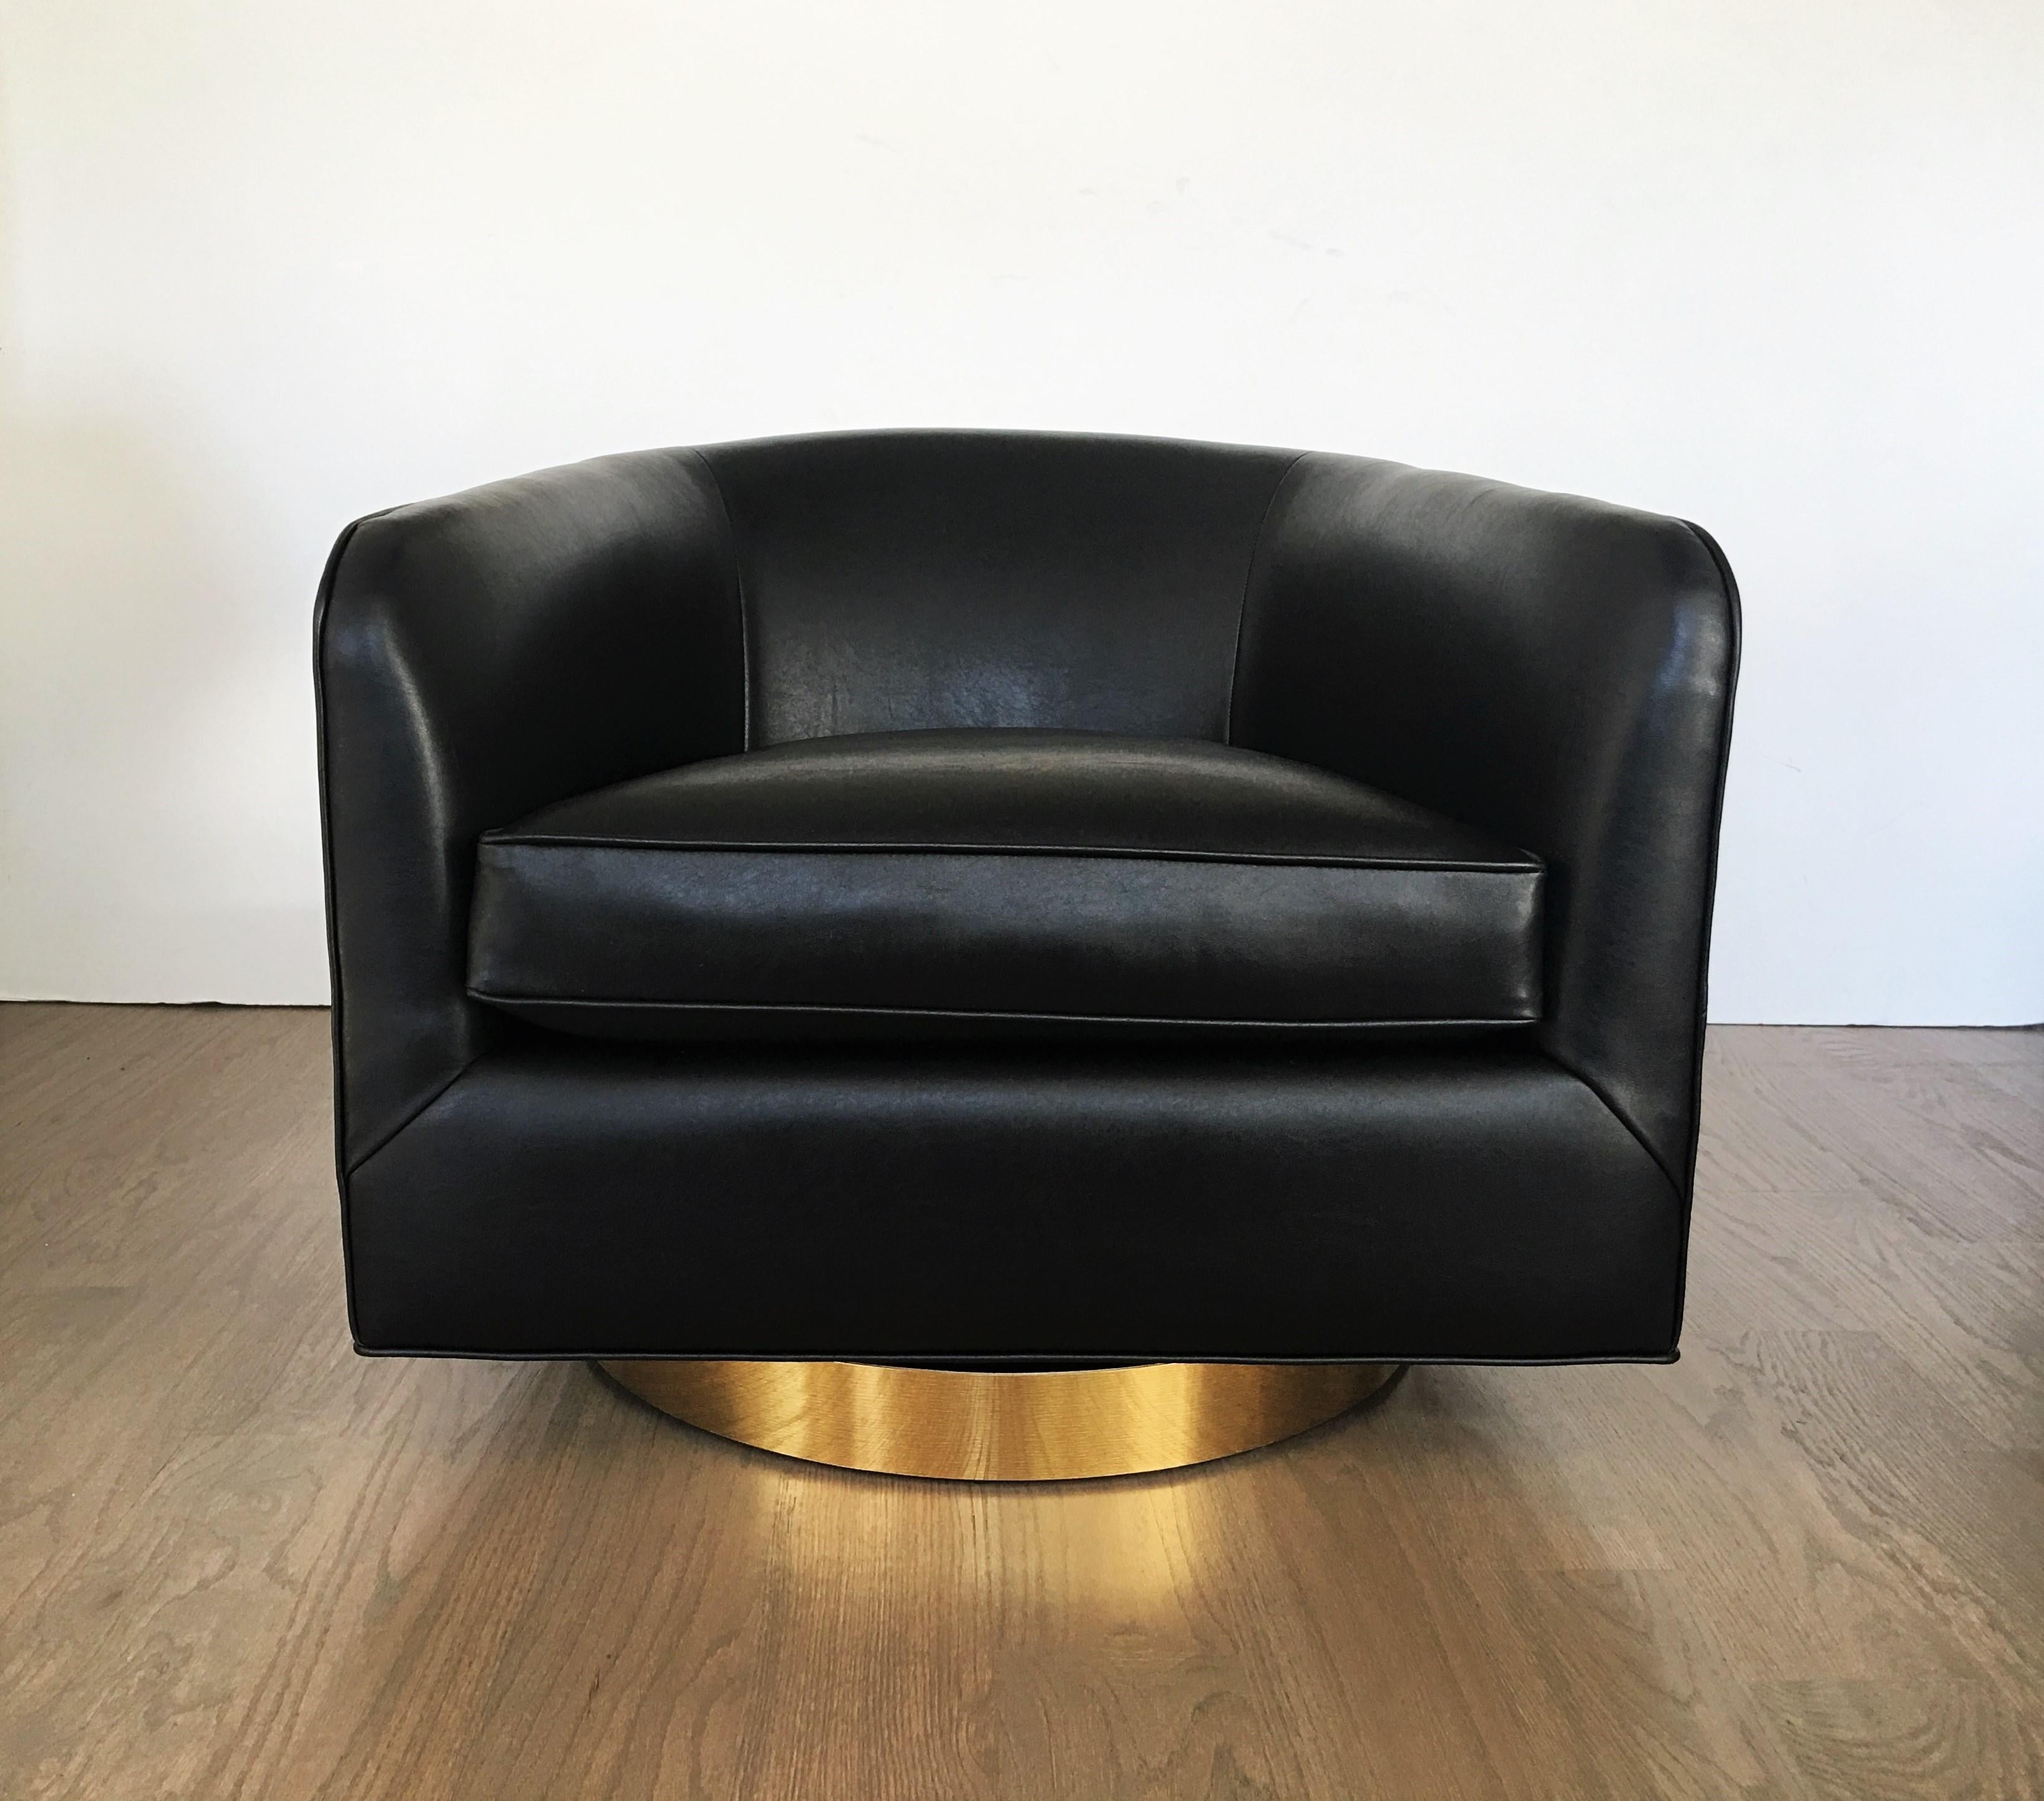 Clean lines and restrained, geometric form these gorgeous swivel chairs designed by Milo Baughman. Freshly restored these well-crafted chairs feature barrel shaped frames reupholstered in rich black upholstery on swivel brass plinths.